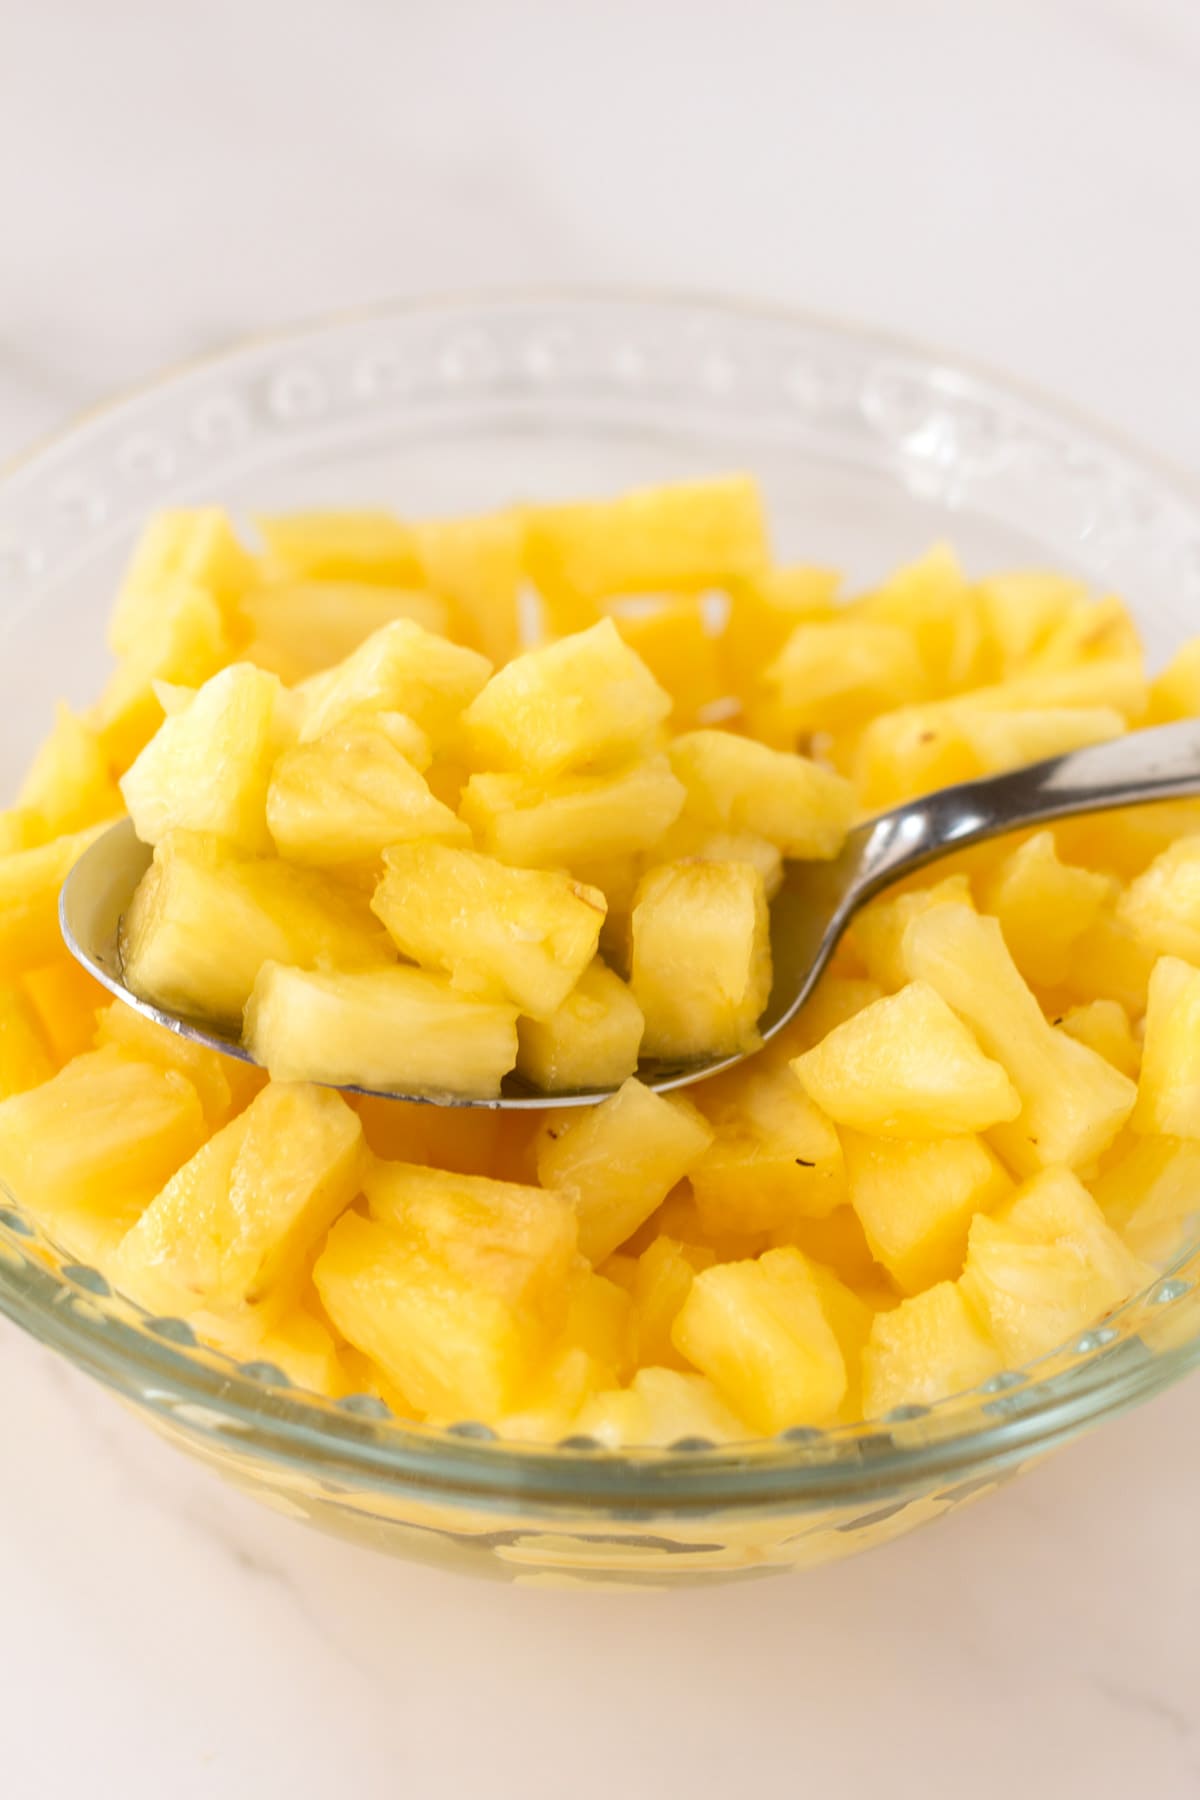 Glass bowl of chopped pineapple and a spoon.